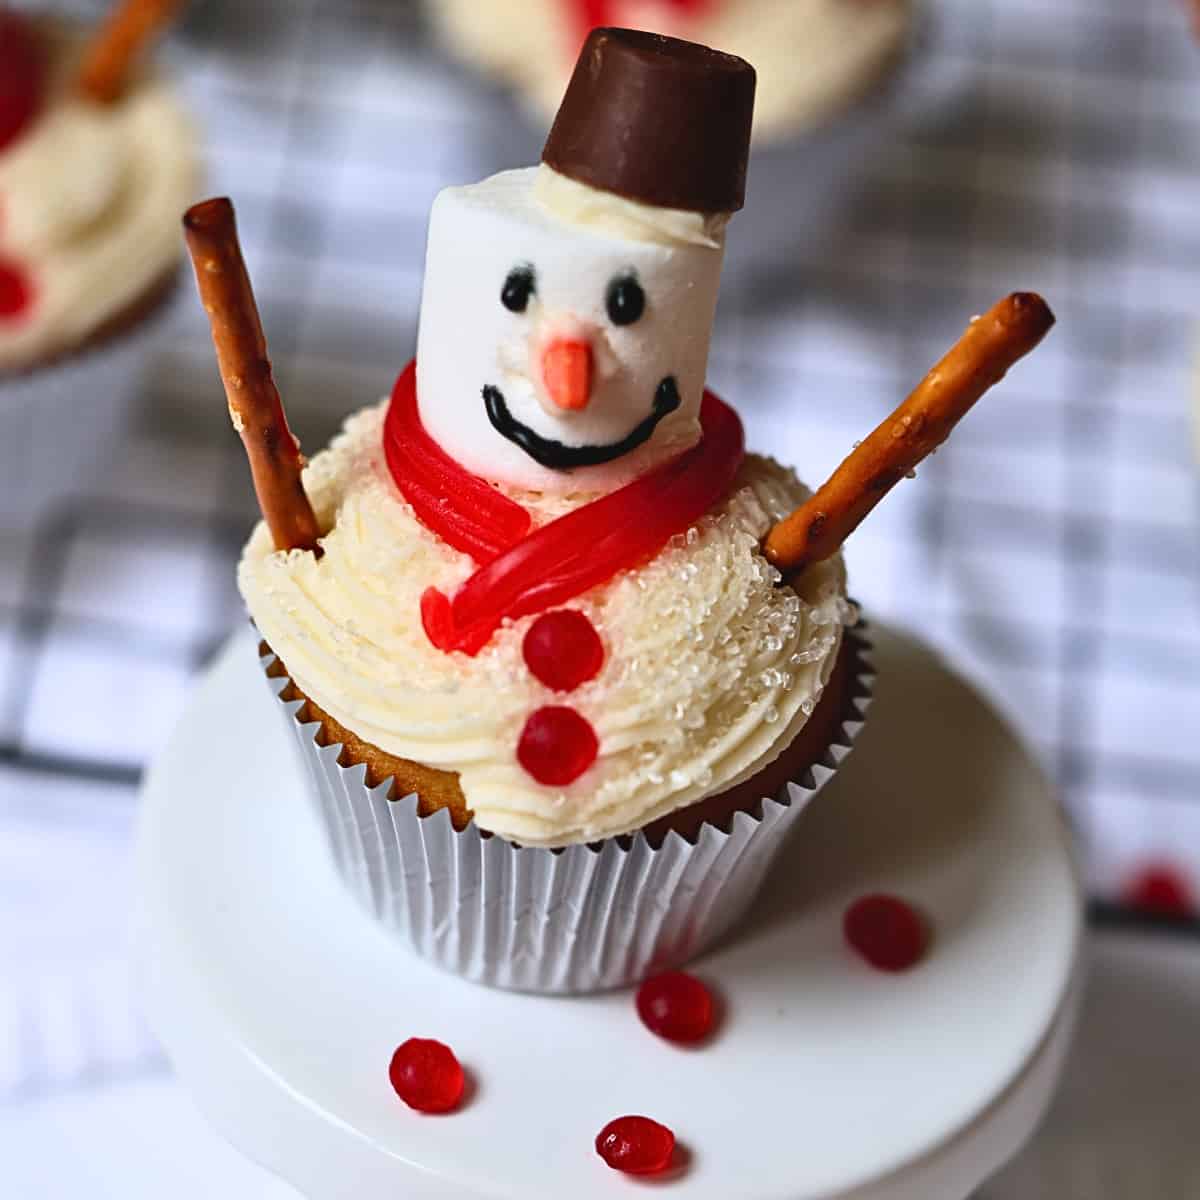 Christmas snowman cupcake with vanilla frosting and candy decorations